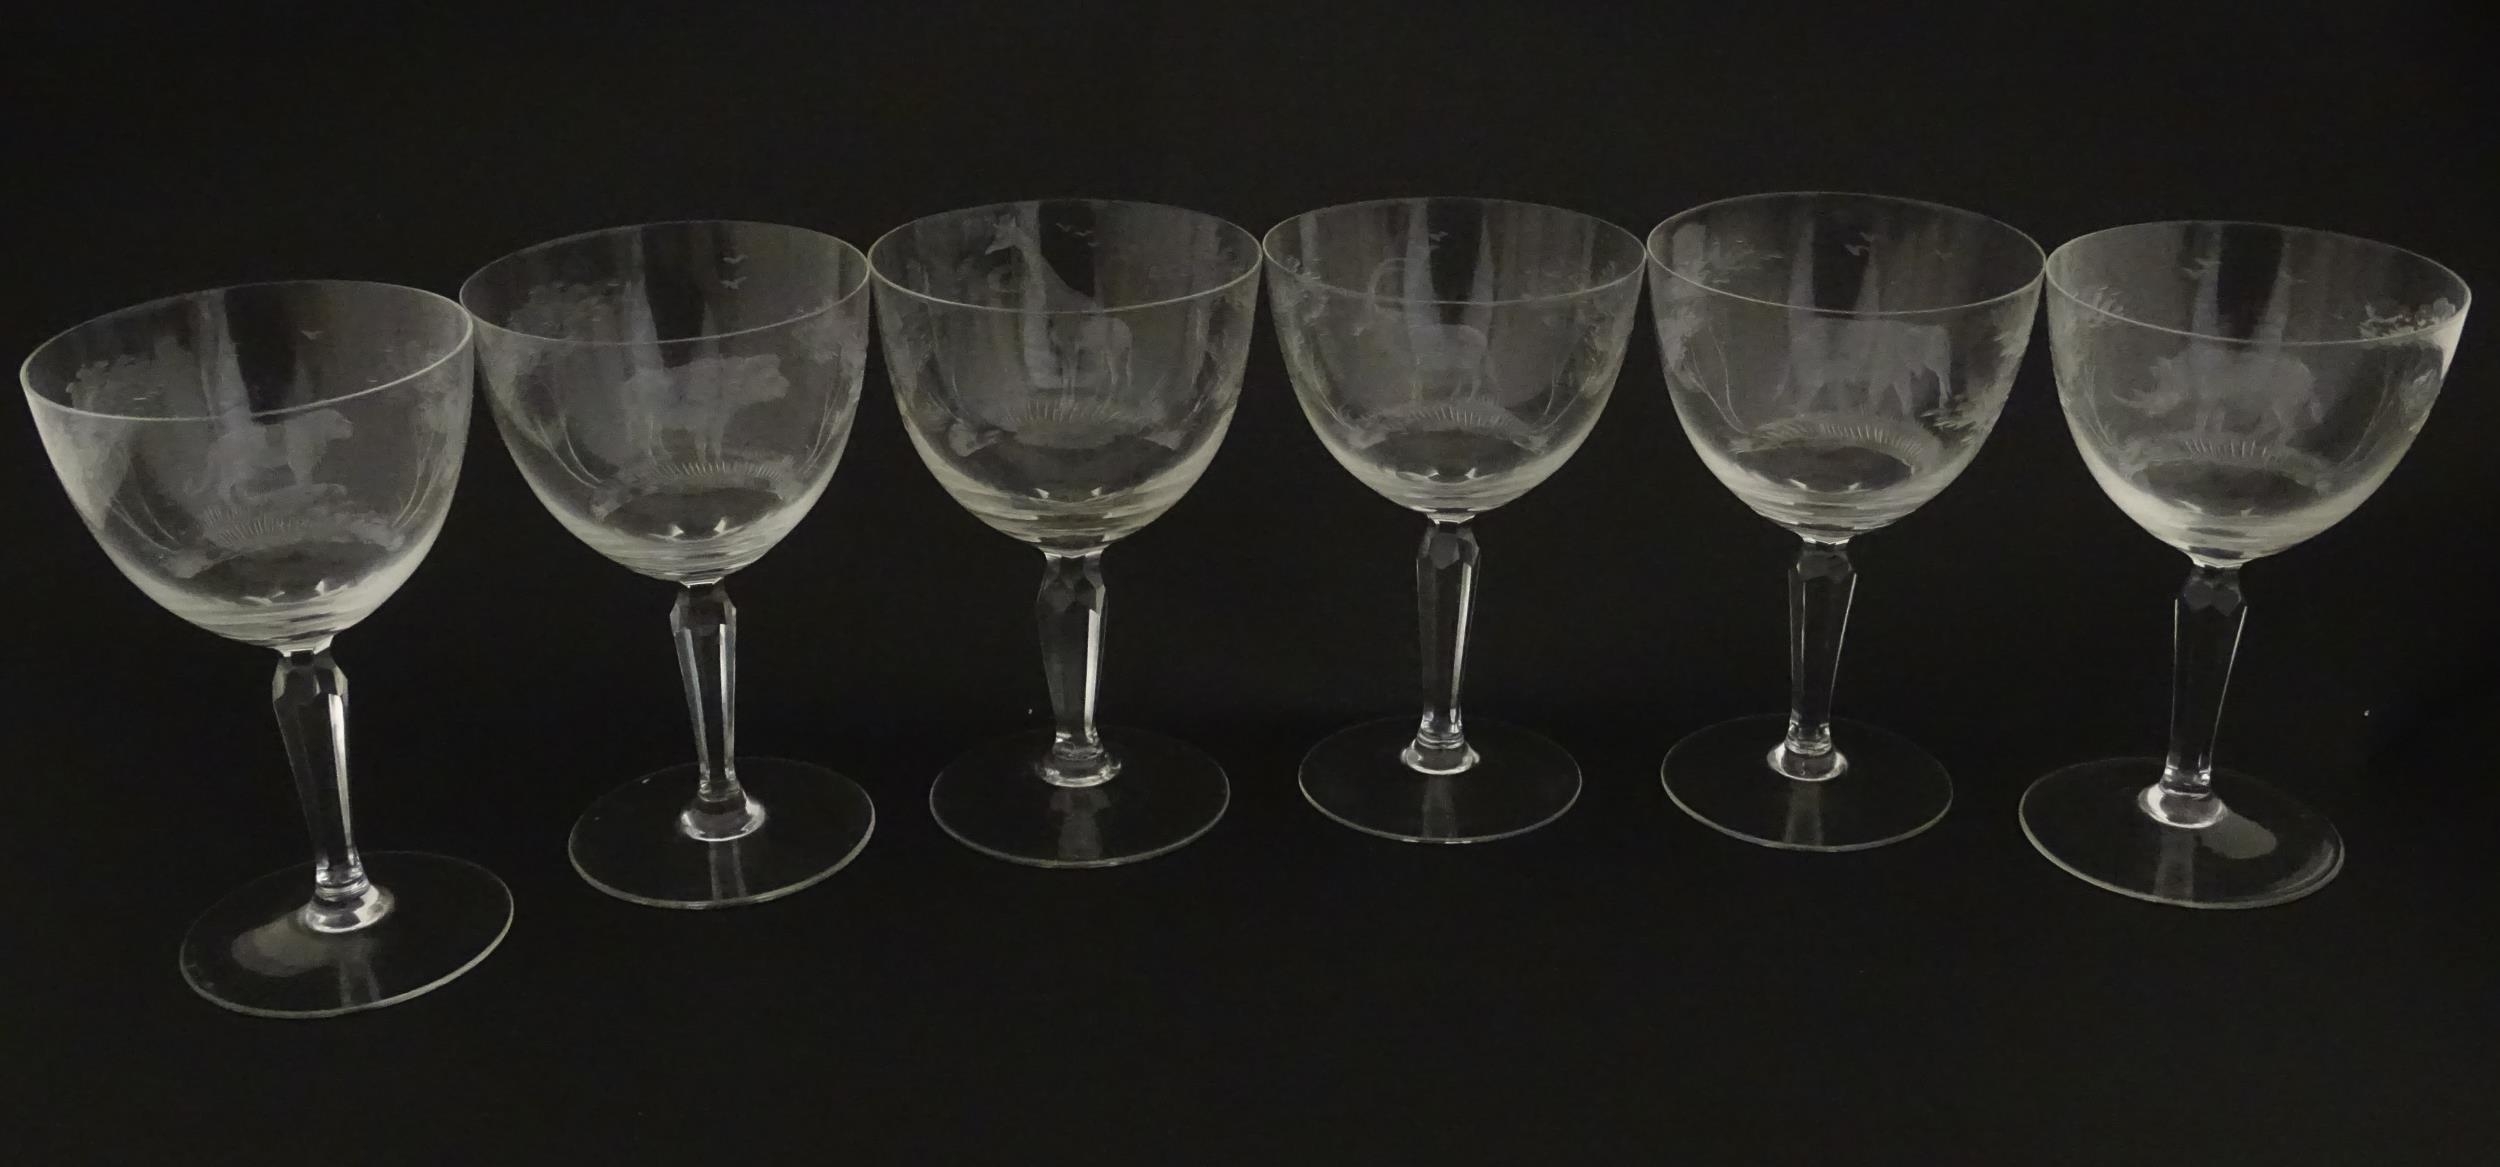 Six Rowland Ward wine glasses with engraved Safari animal detail. Unsigned. Approx. 5 1/2" high ( - Image 6 of 15